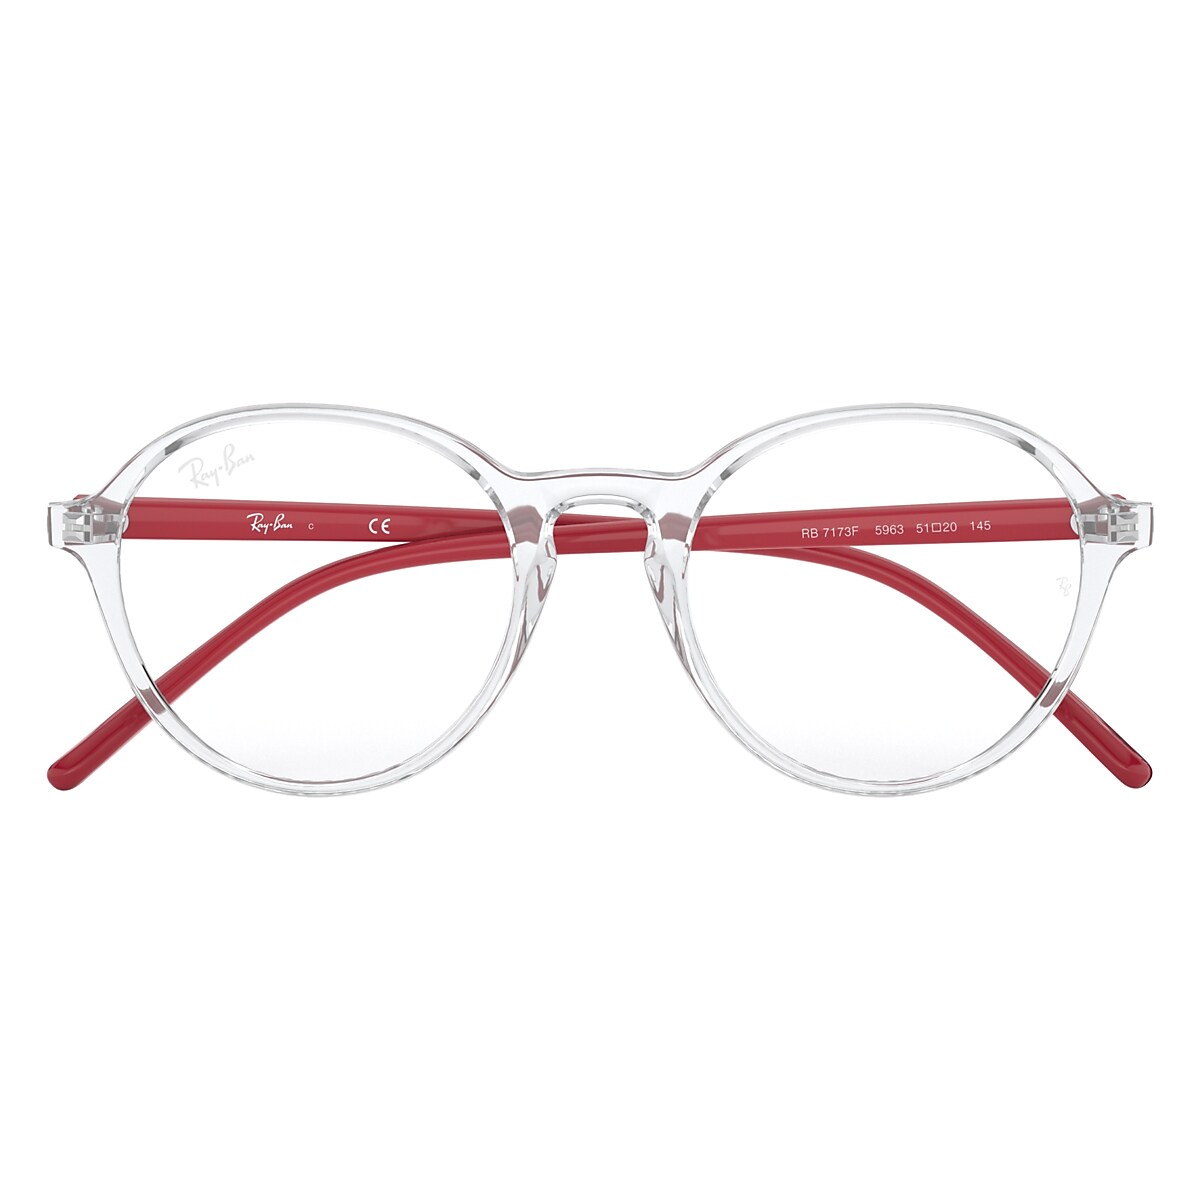 Rb7173 Eyeglasses with Transparent Frame | Ray-Ban®